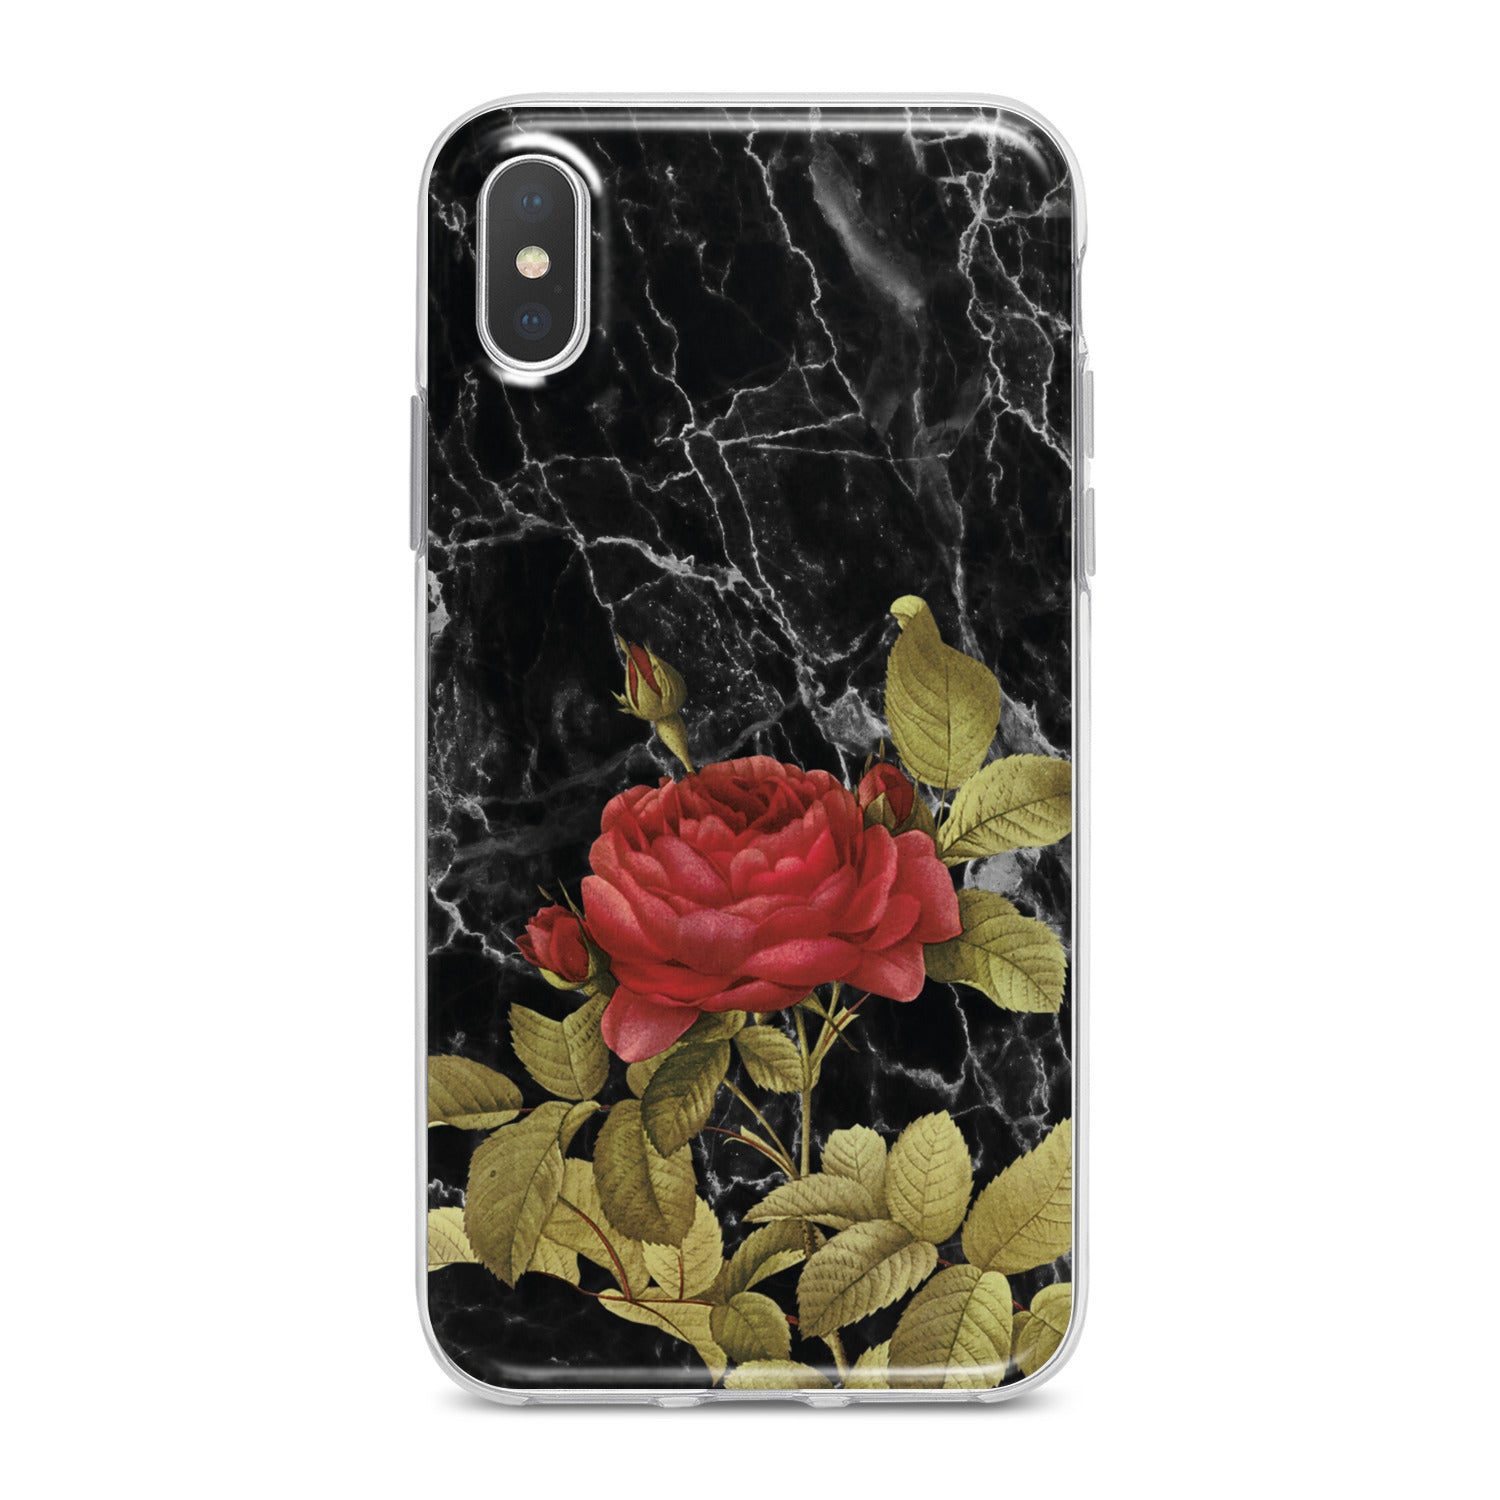 Lex Altern Red Rose Phone Case for your iPhone & Android phone.